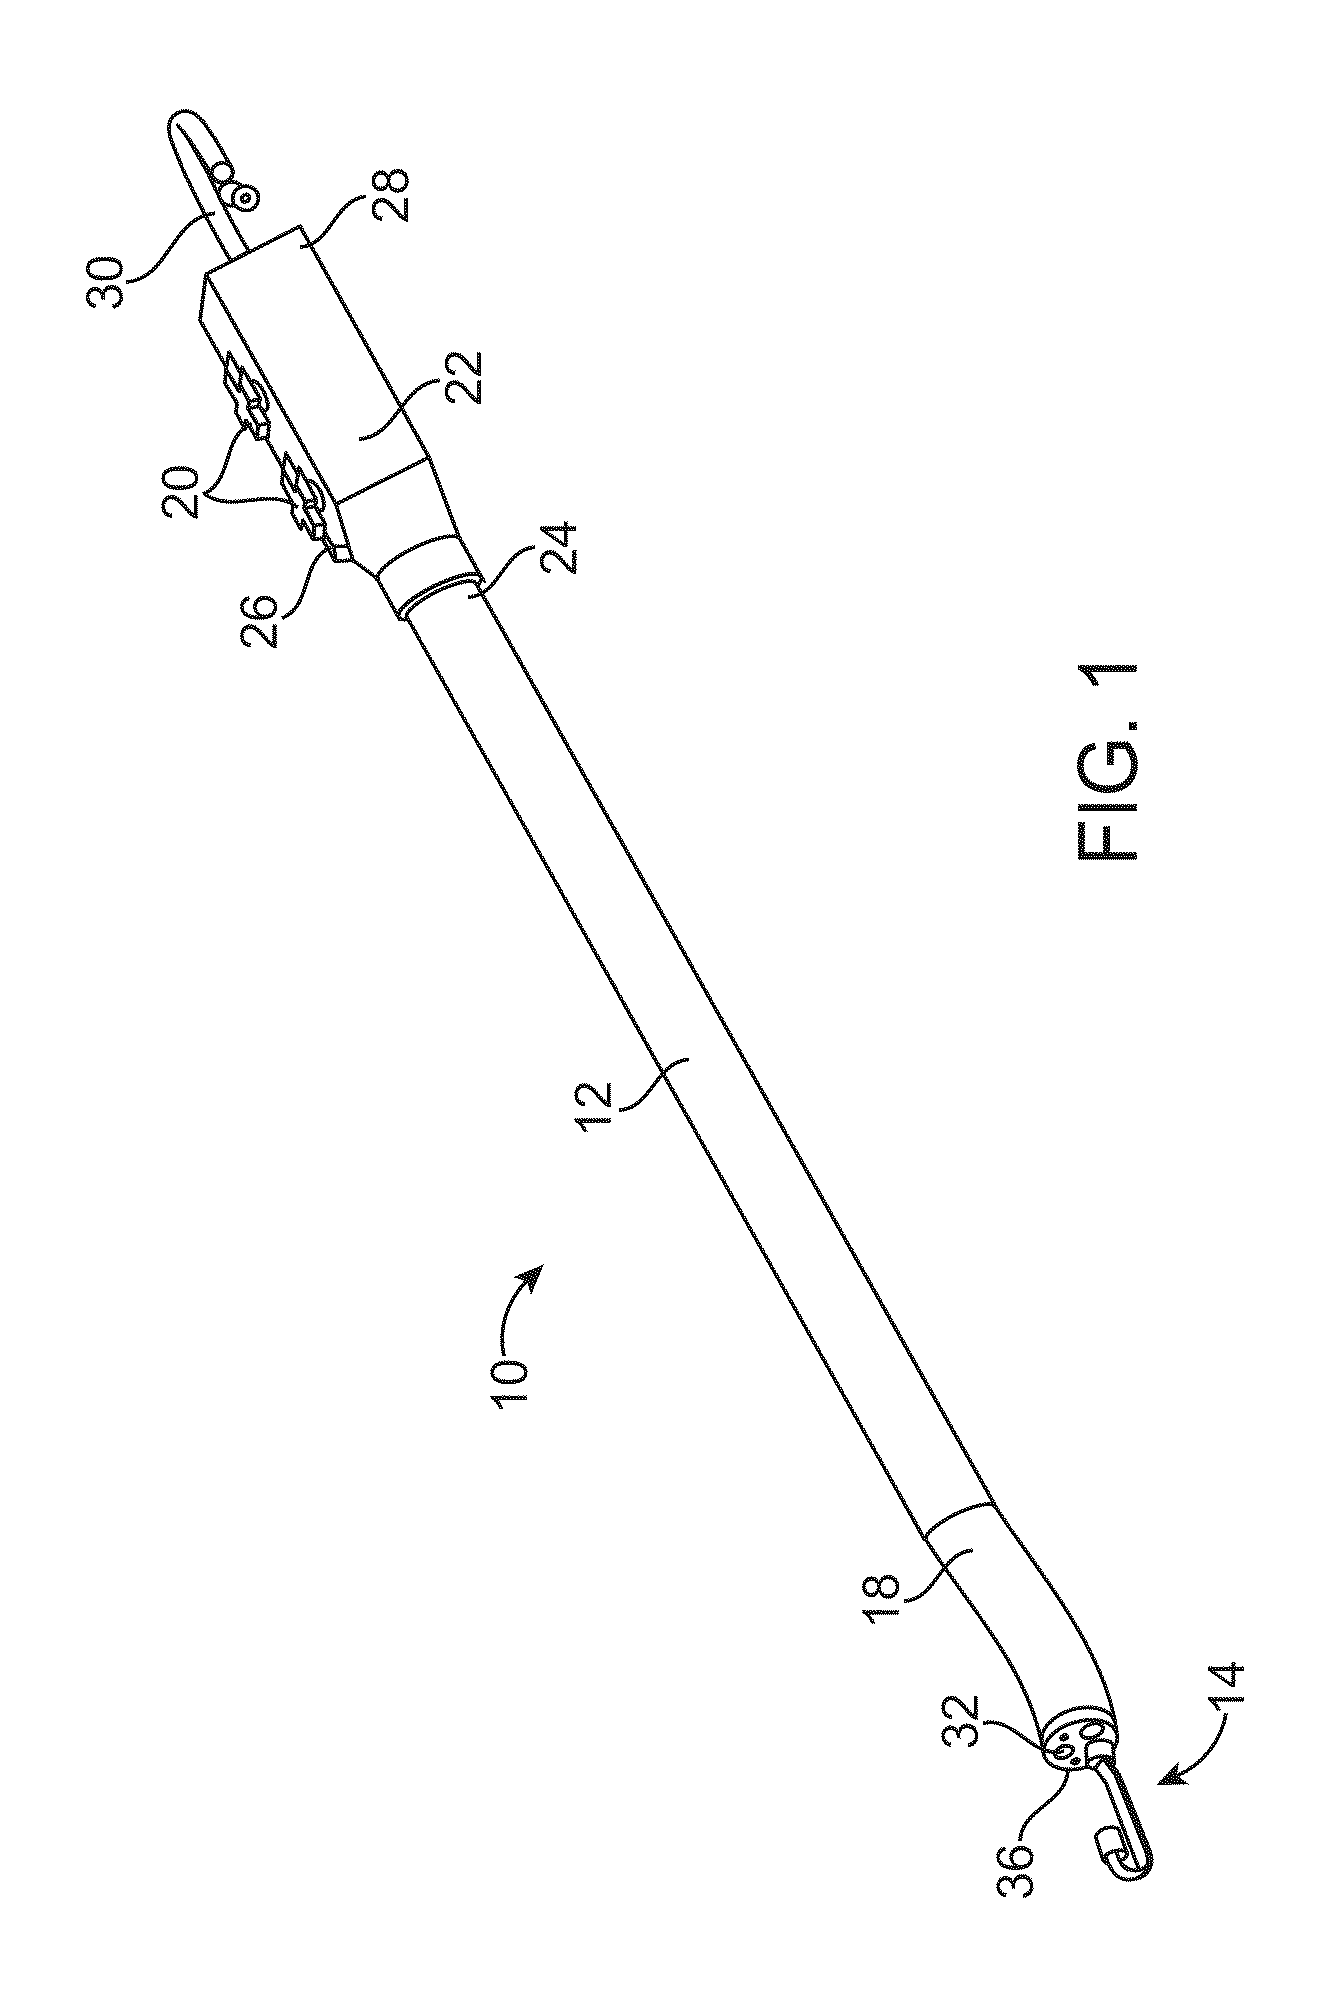 Method and Device for Reducing the Fixed Pattern Noise of a Digital Image